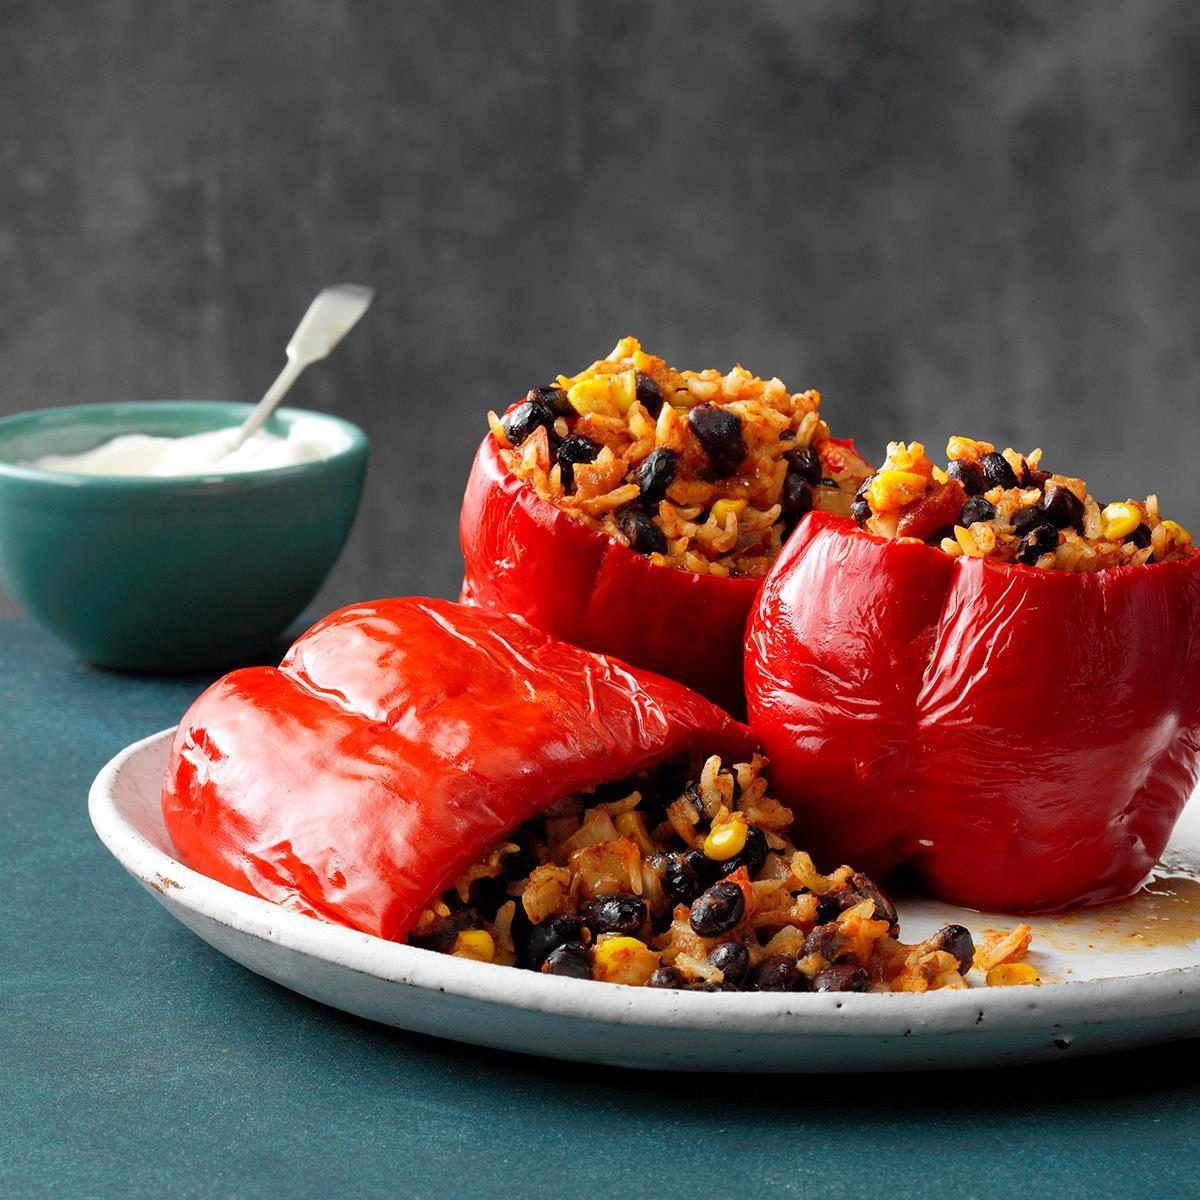 Day 15: Slow-Cooked Stuffed Peppers